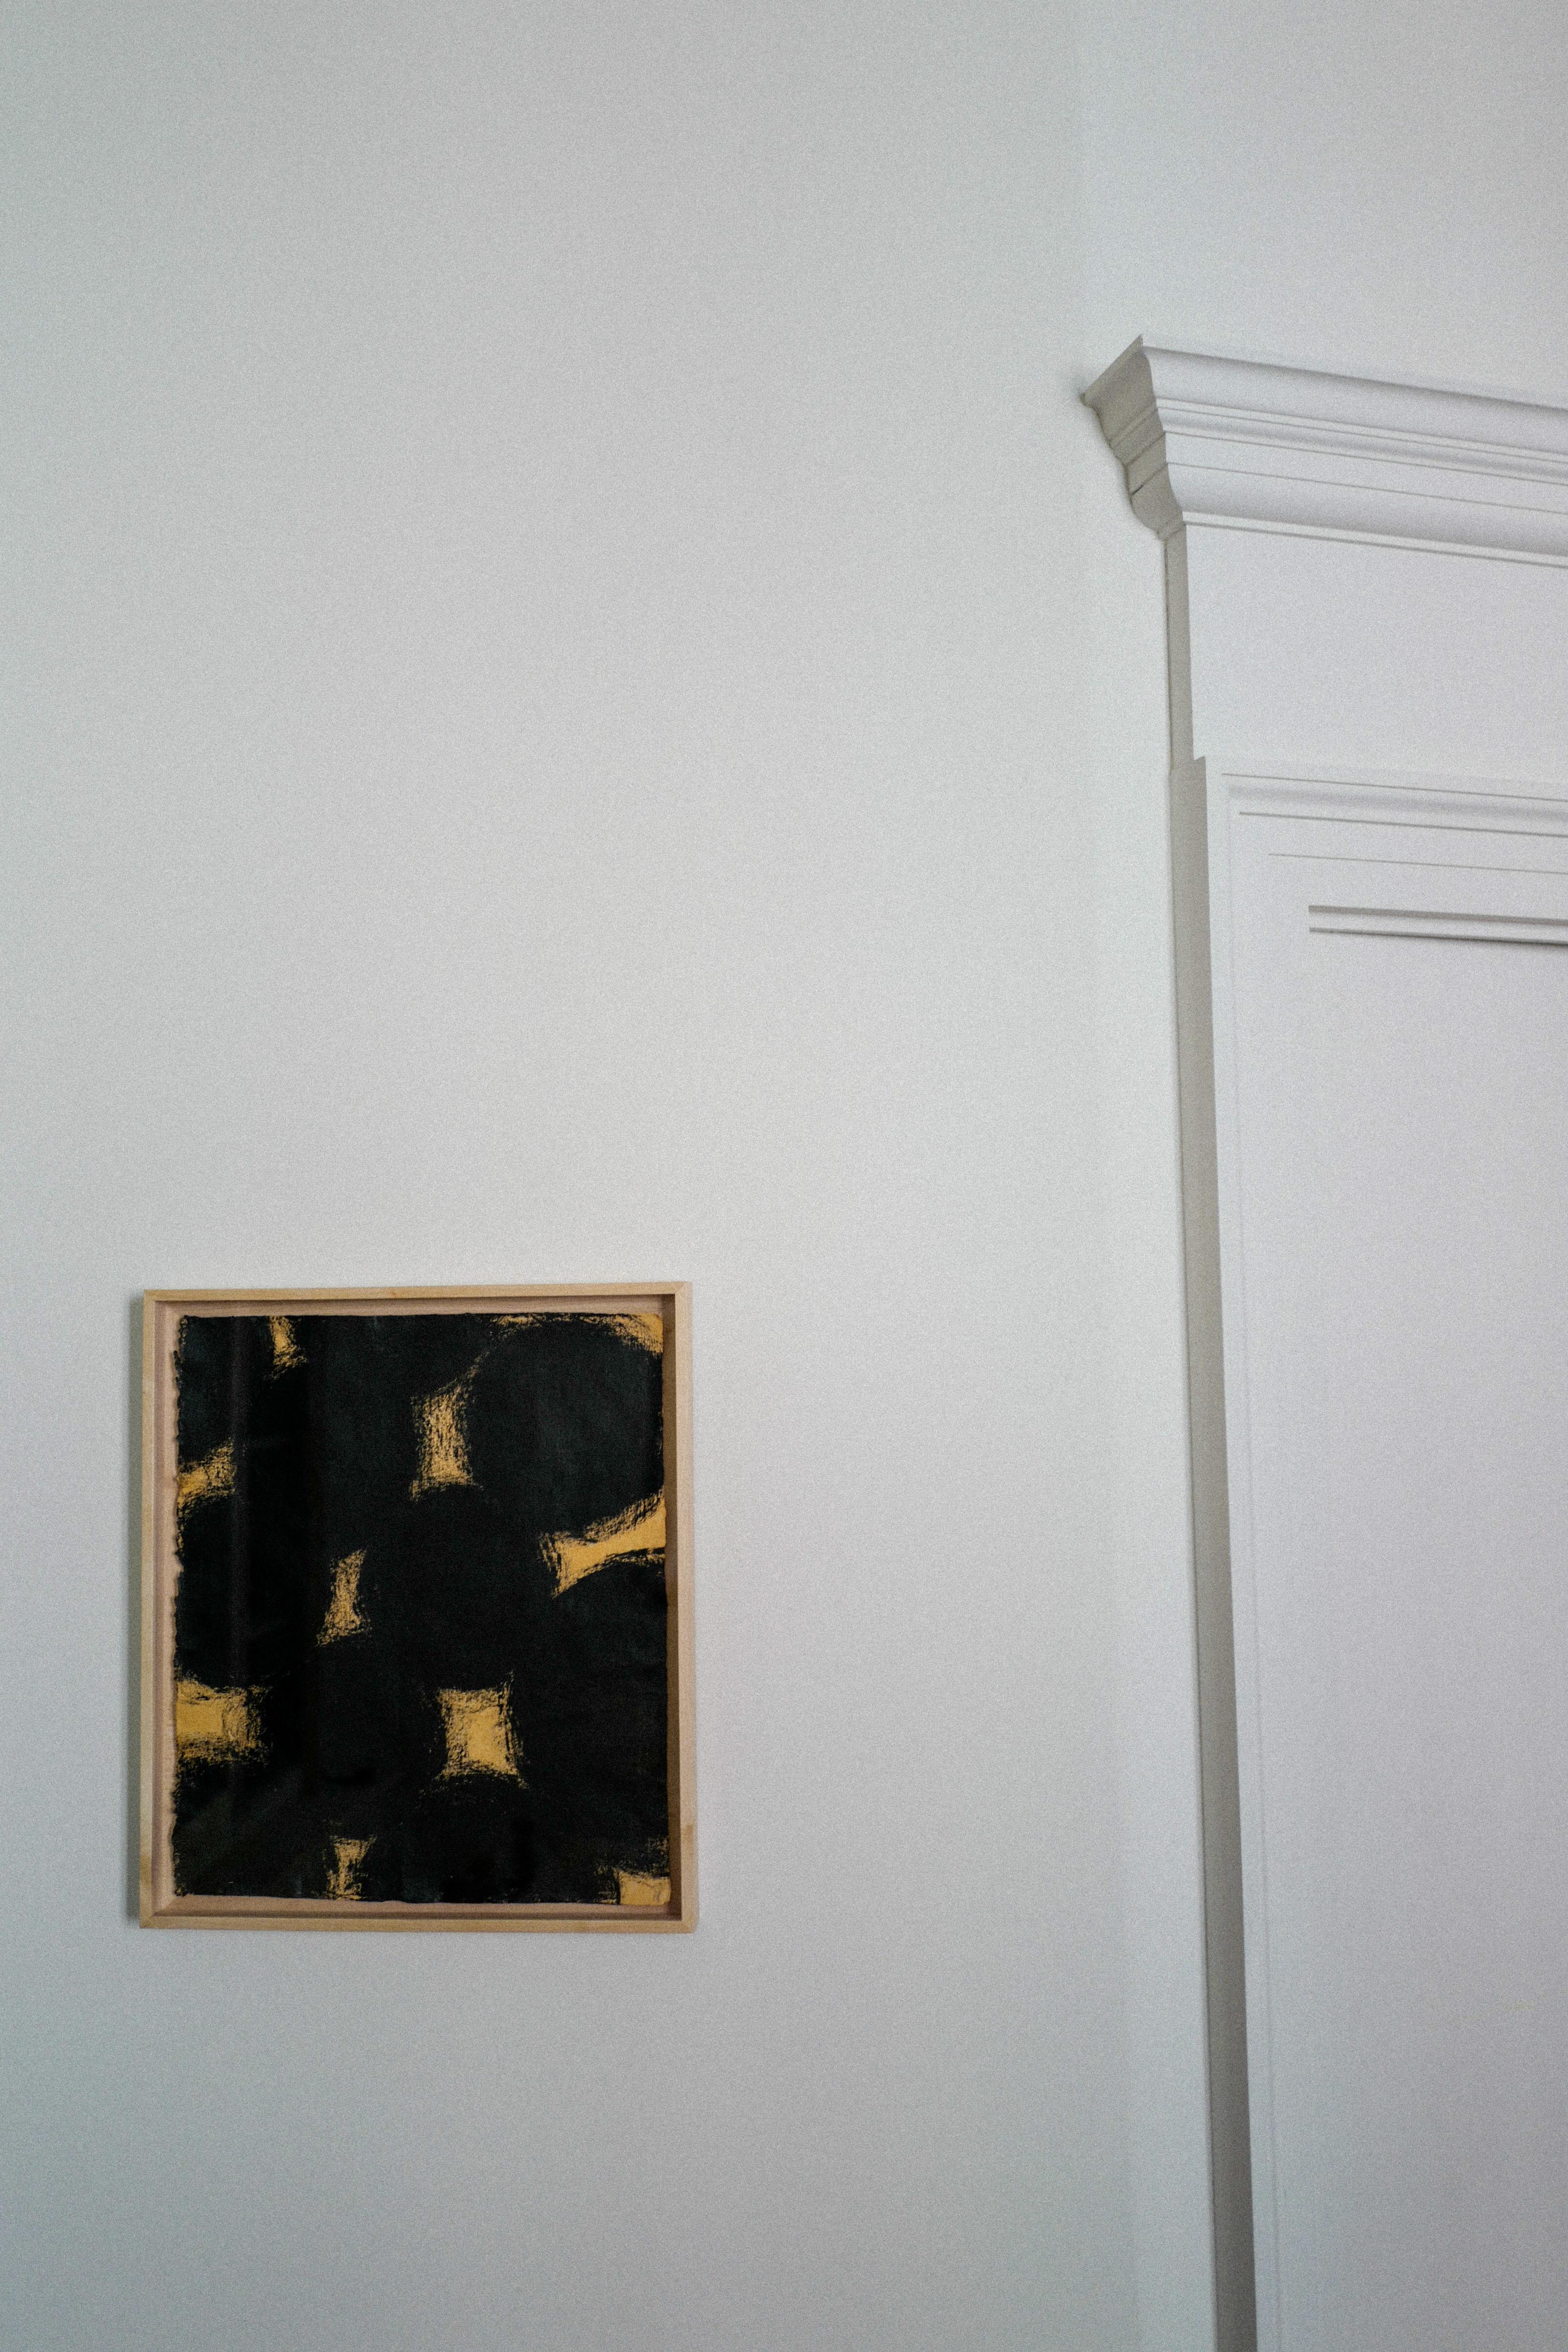 Geometric Black Acrlyic Contemporary painting by Alejo Palacios Wall Art In Excellent Condition For Sale In Milano, IT